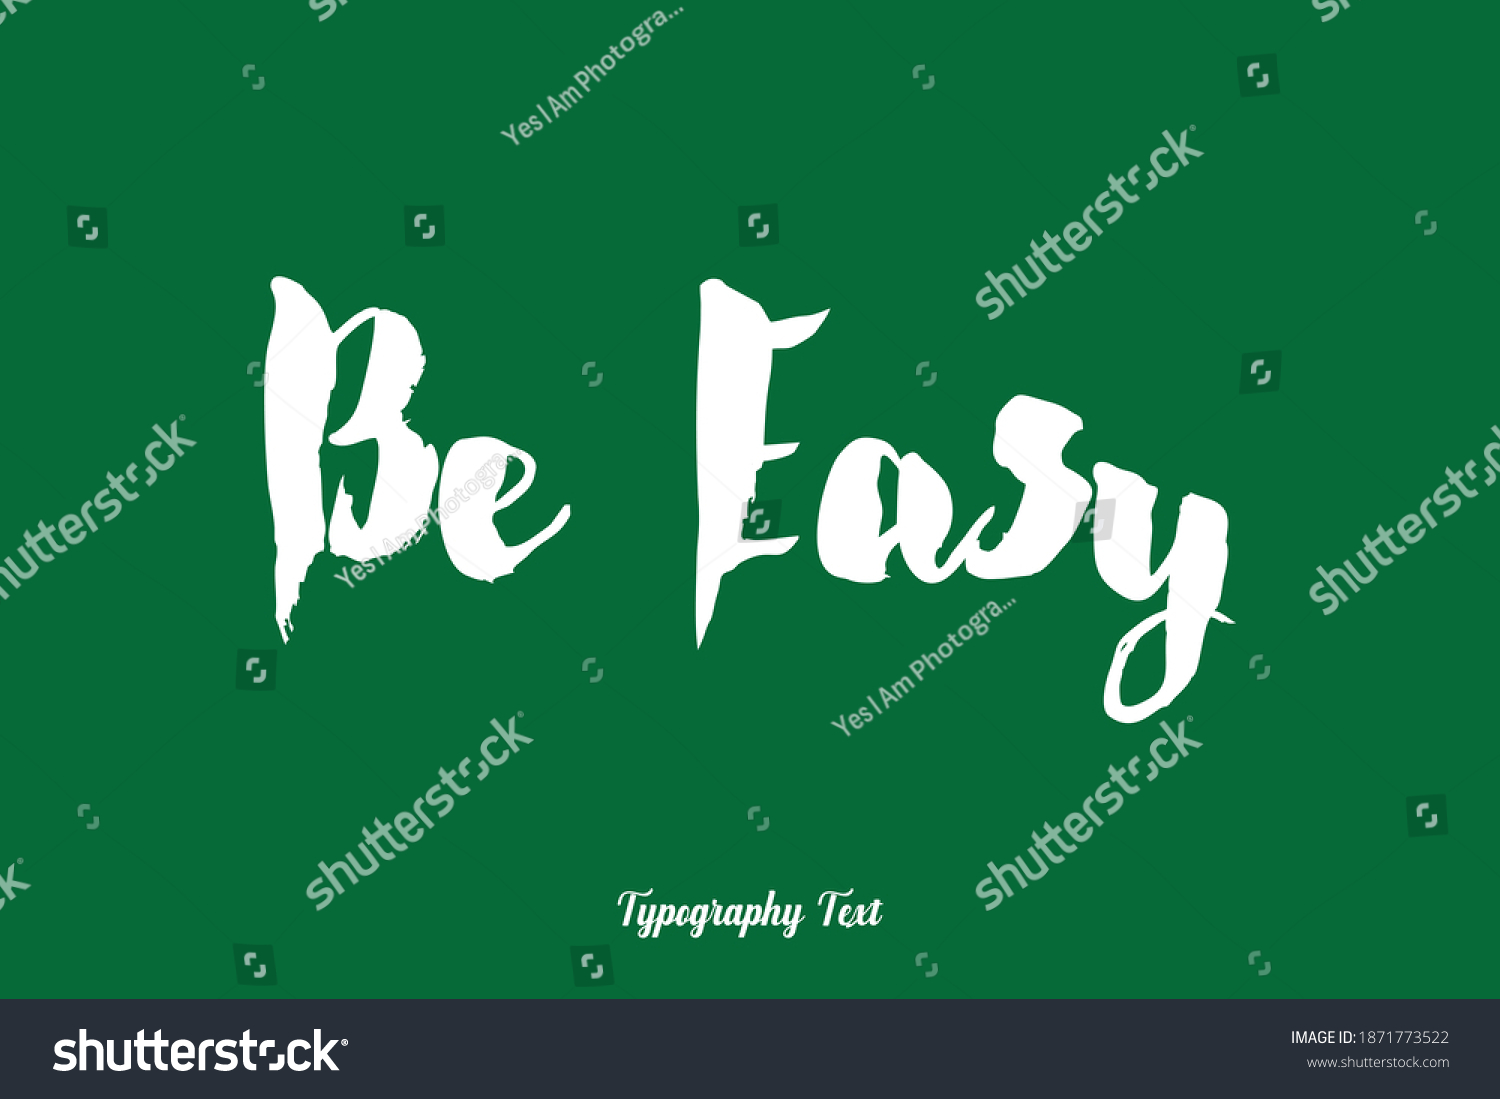 Be Easy Calligraphy Typeface On Green Background #1871773522